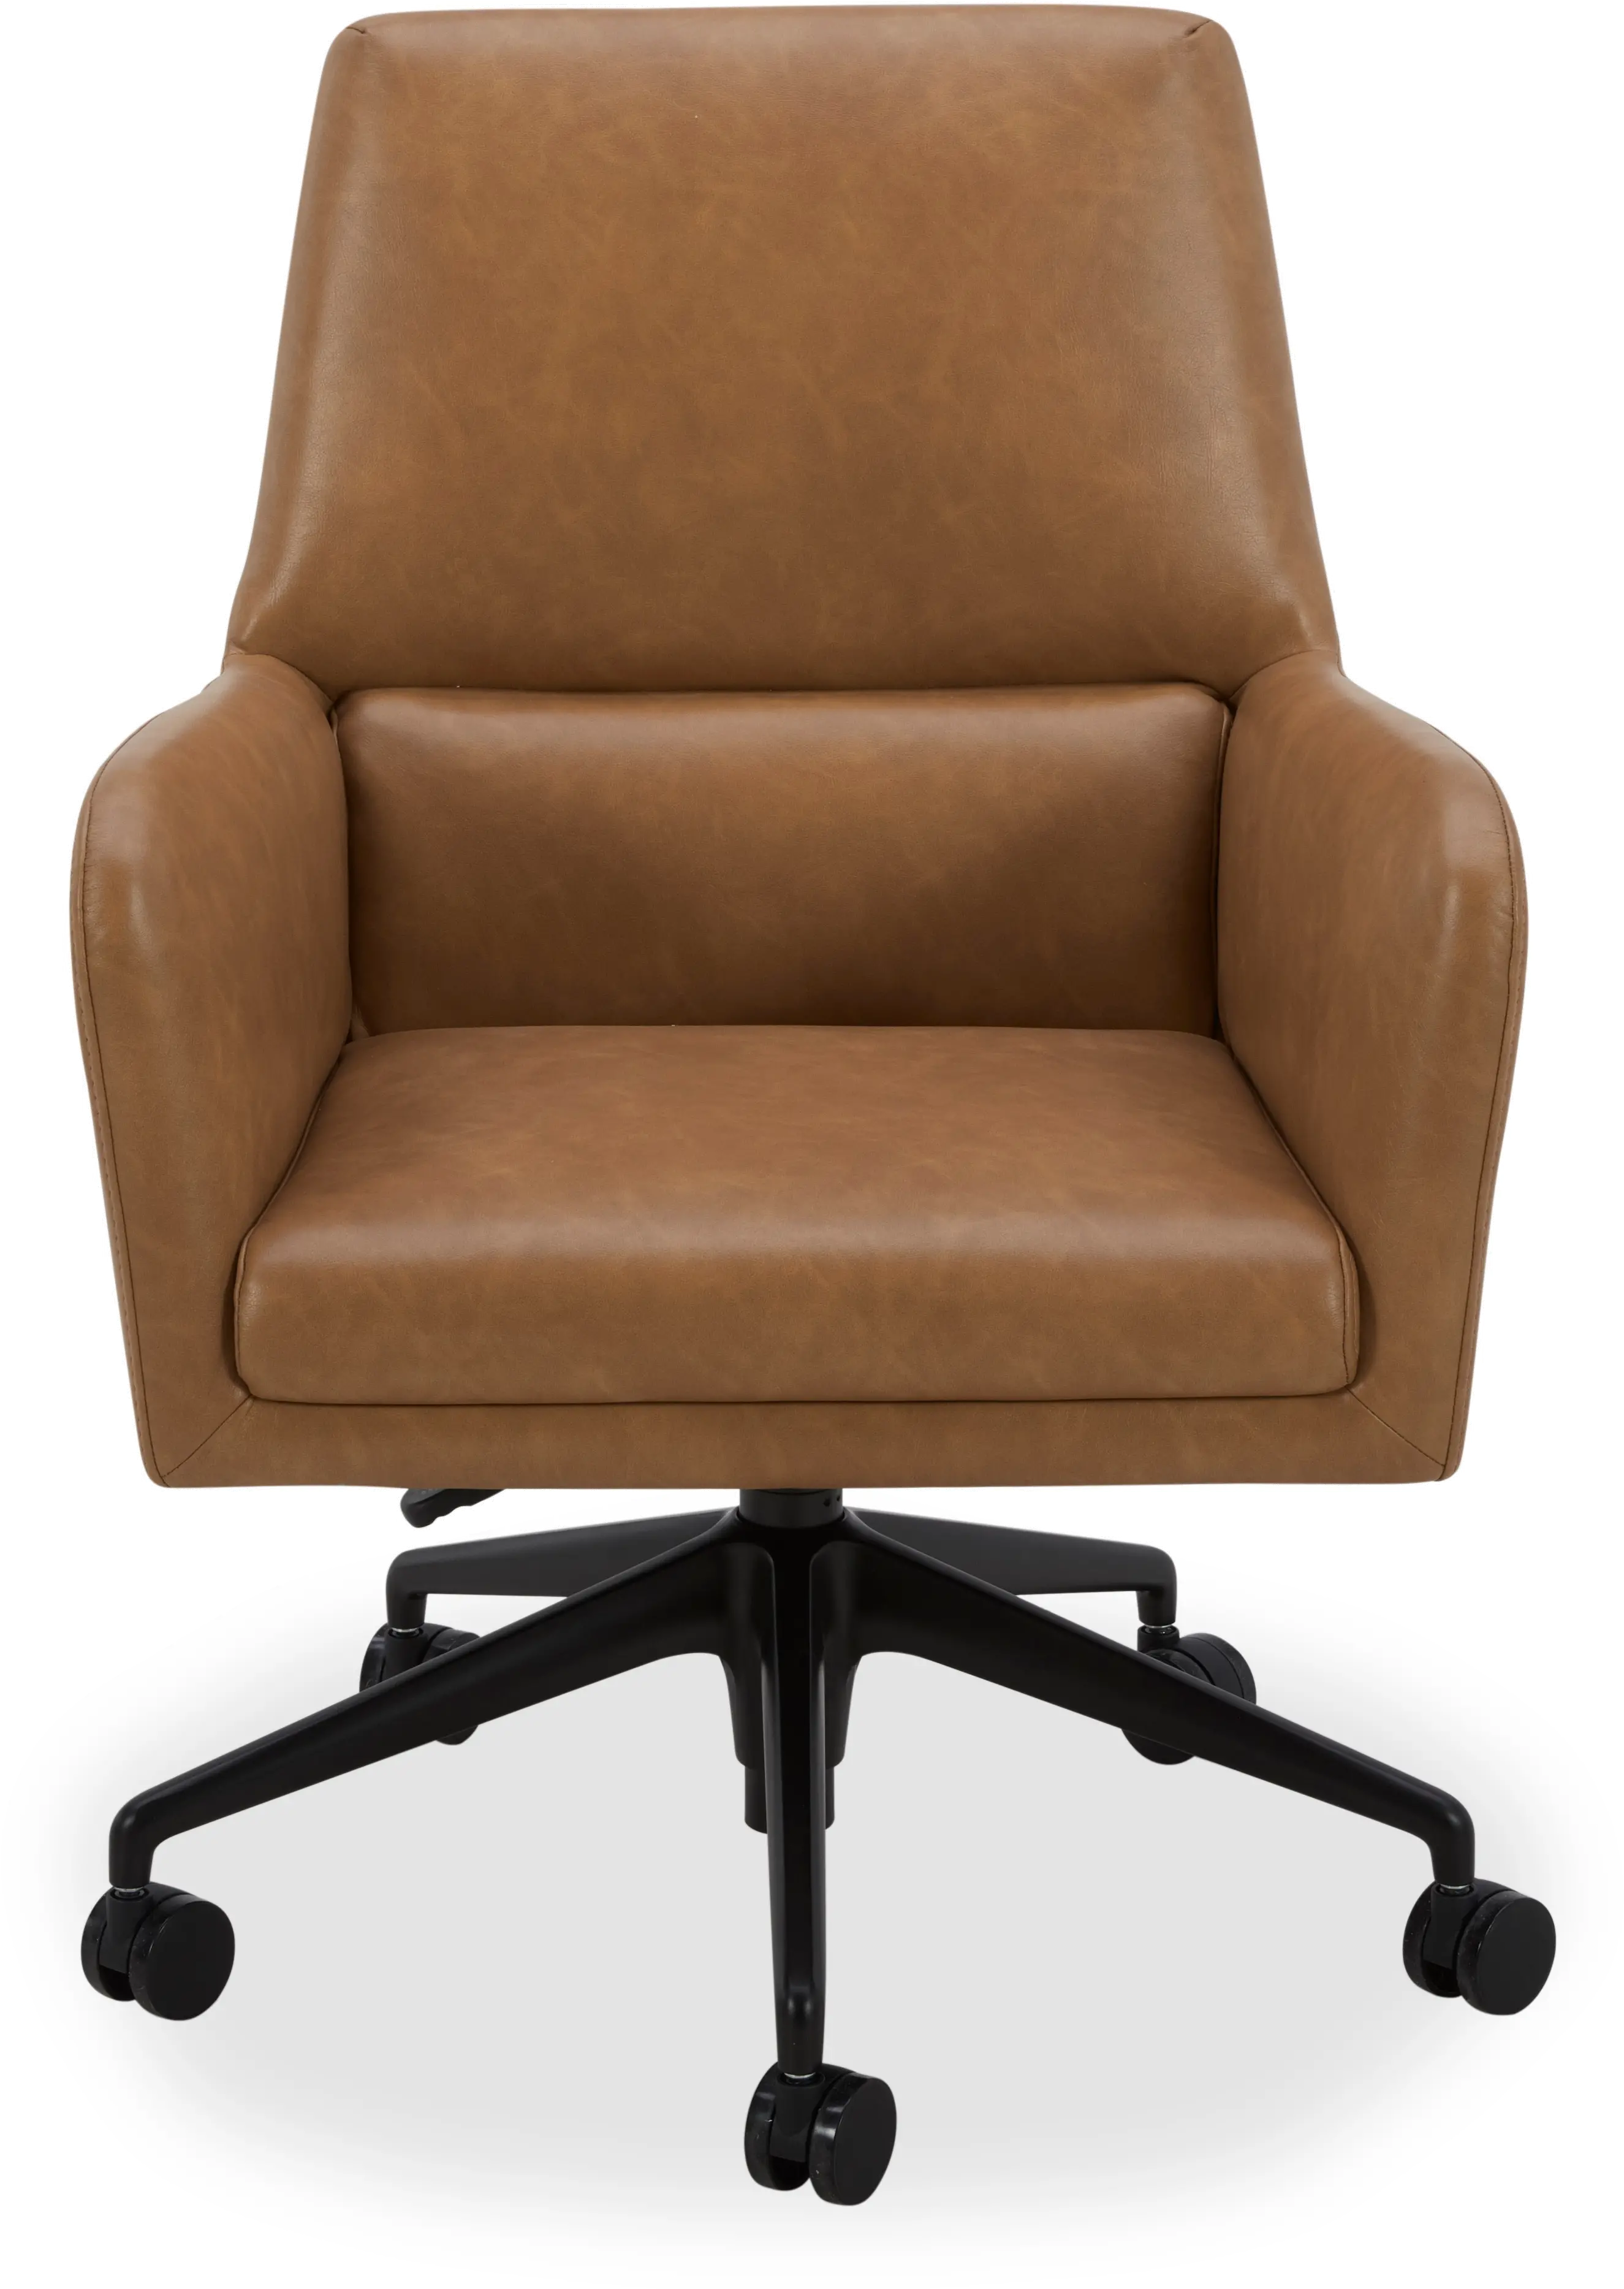 Copley Camel Caster Office Chair